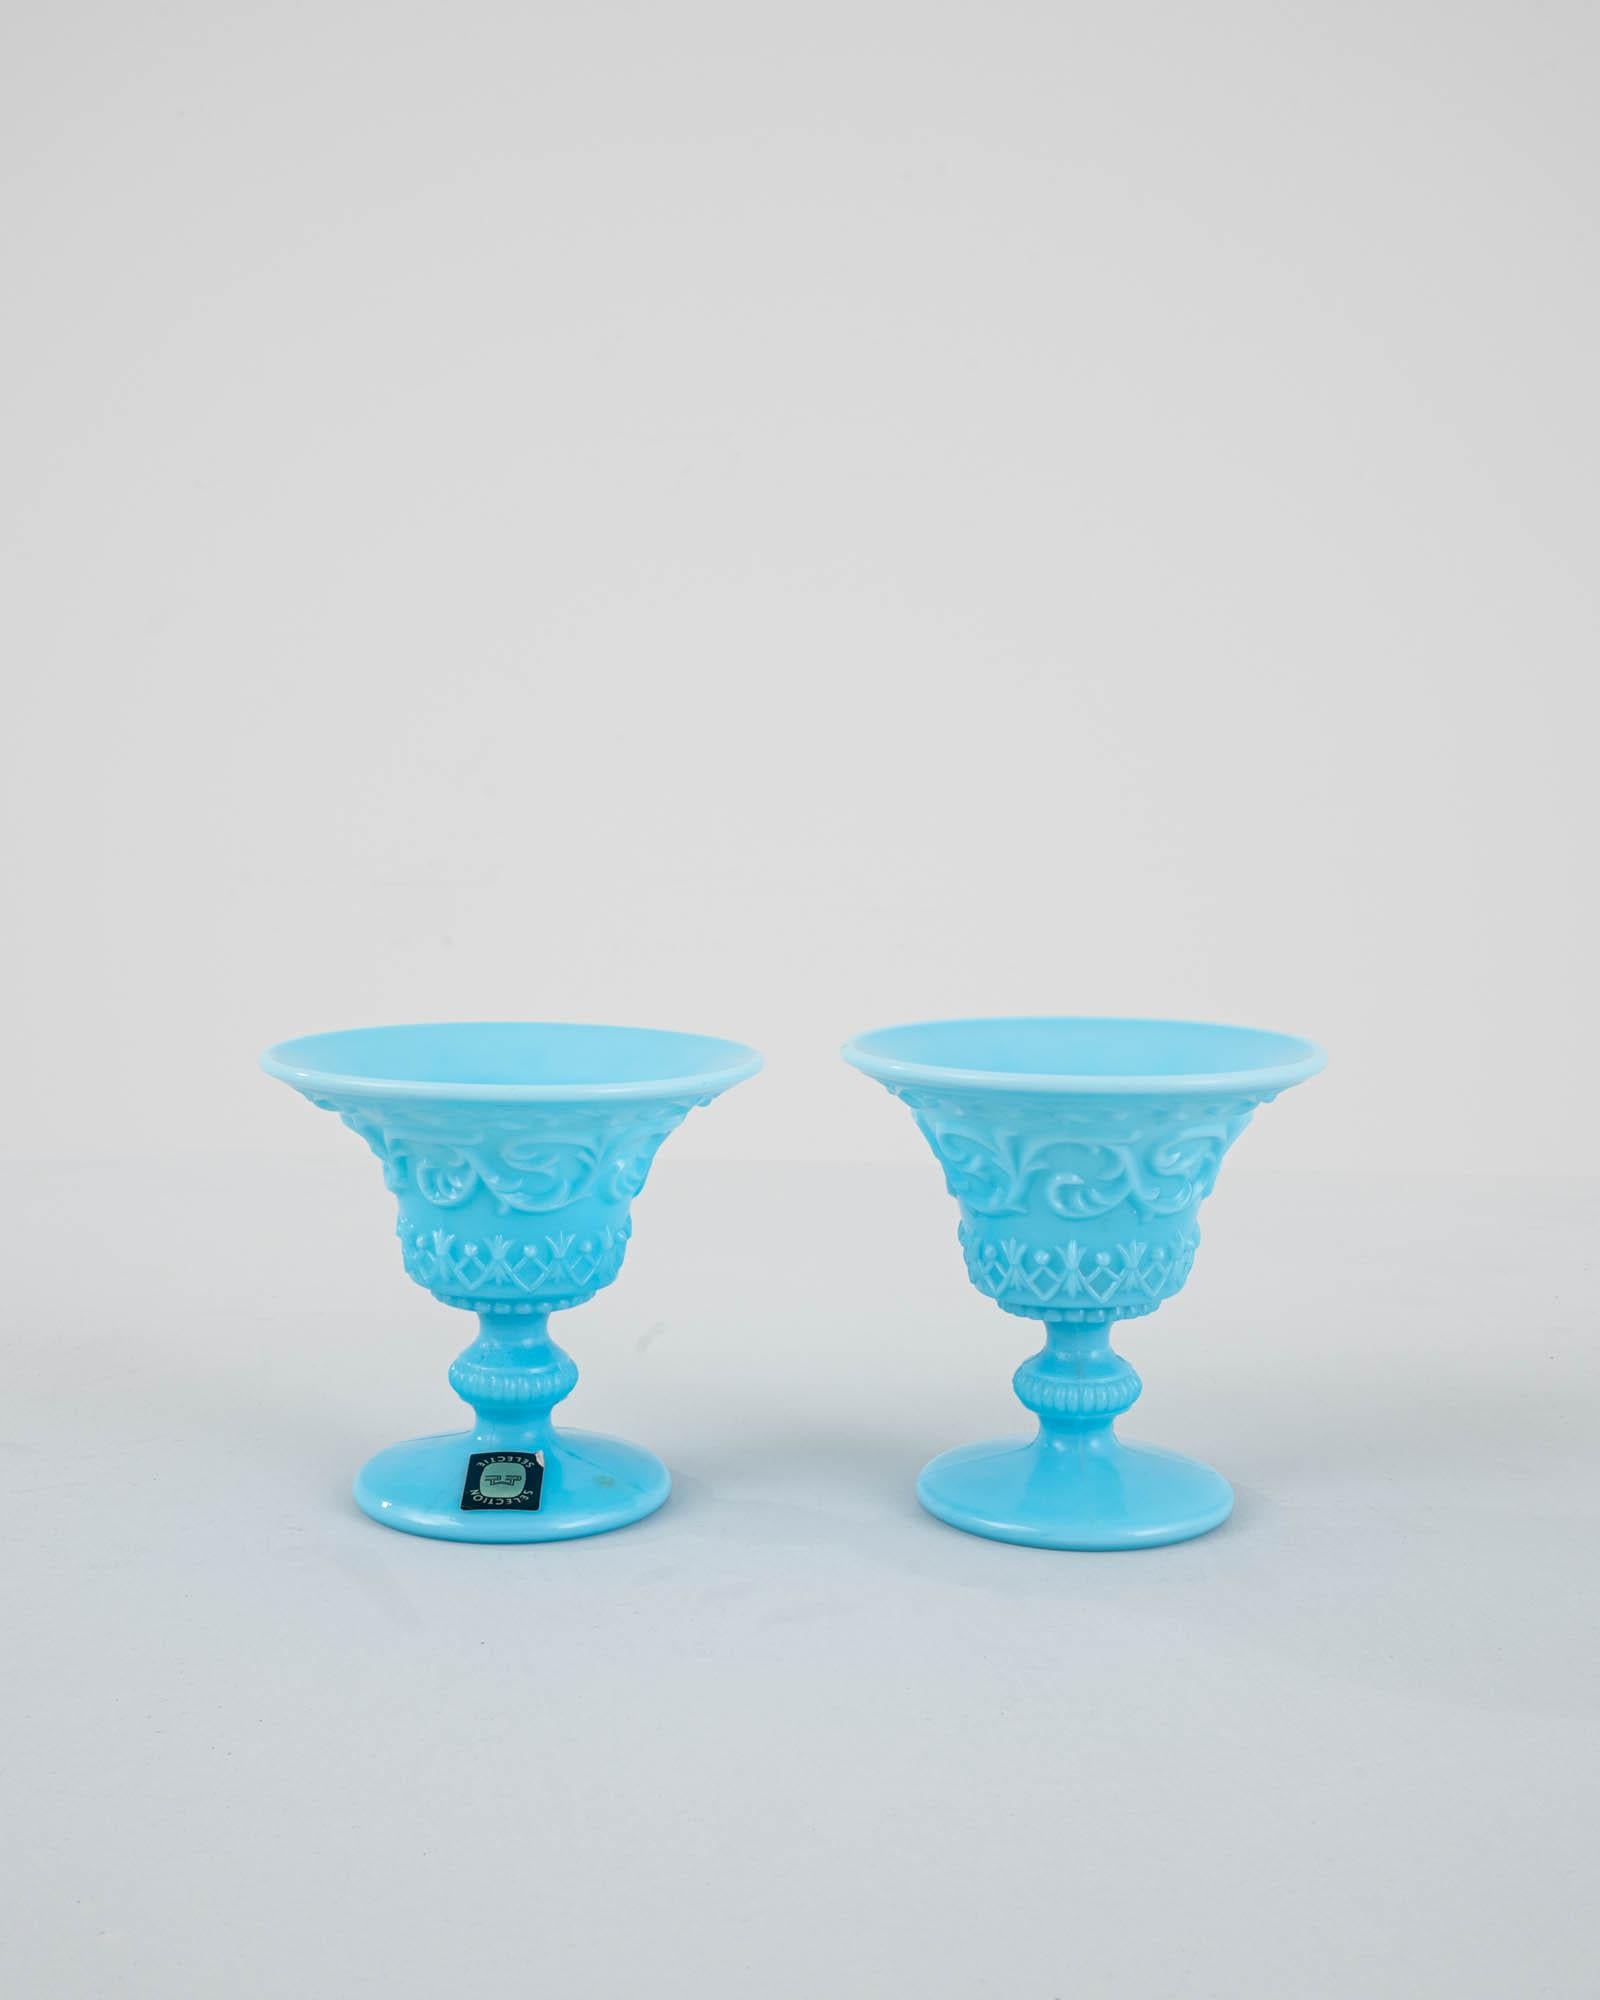 This pair of vintage glass cups are a delight to behold. Made in Italy in the 20th century, the wide lip of the bell-shaped cup indicates that this set could have been used for serving ice cream or similarly delectable desserts. The cup is decorated